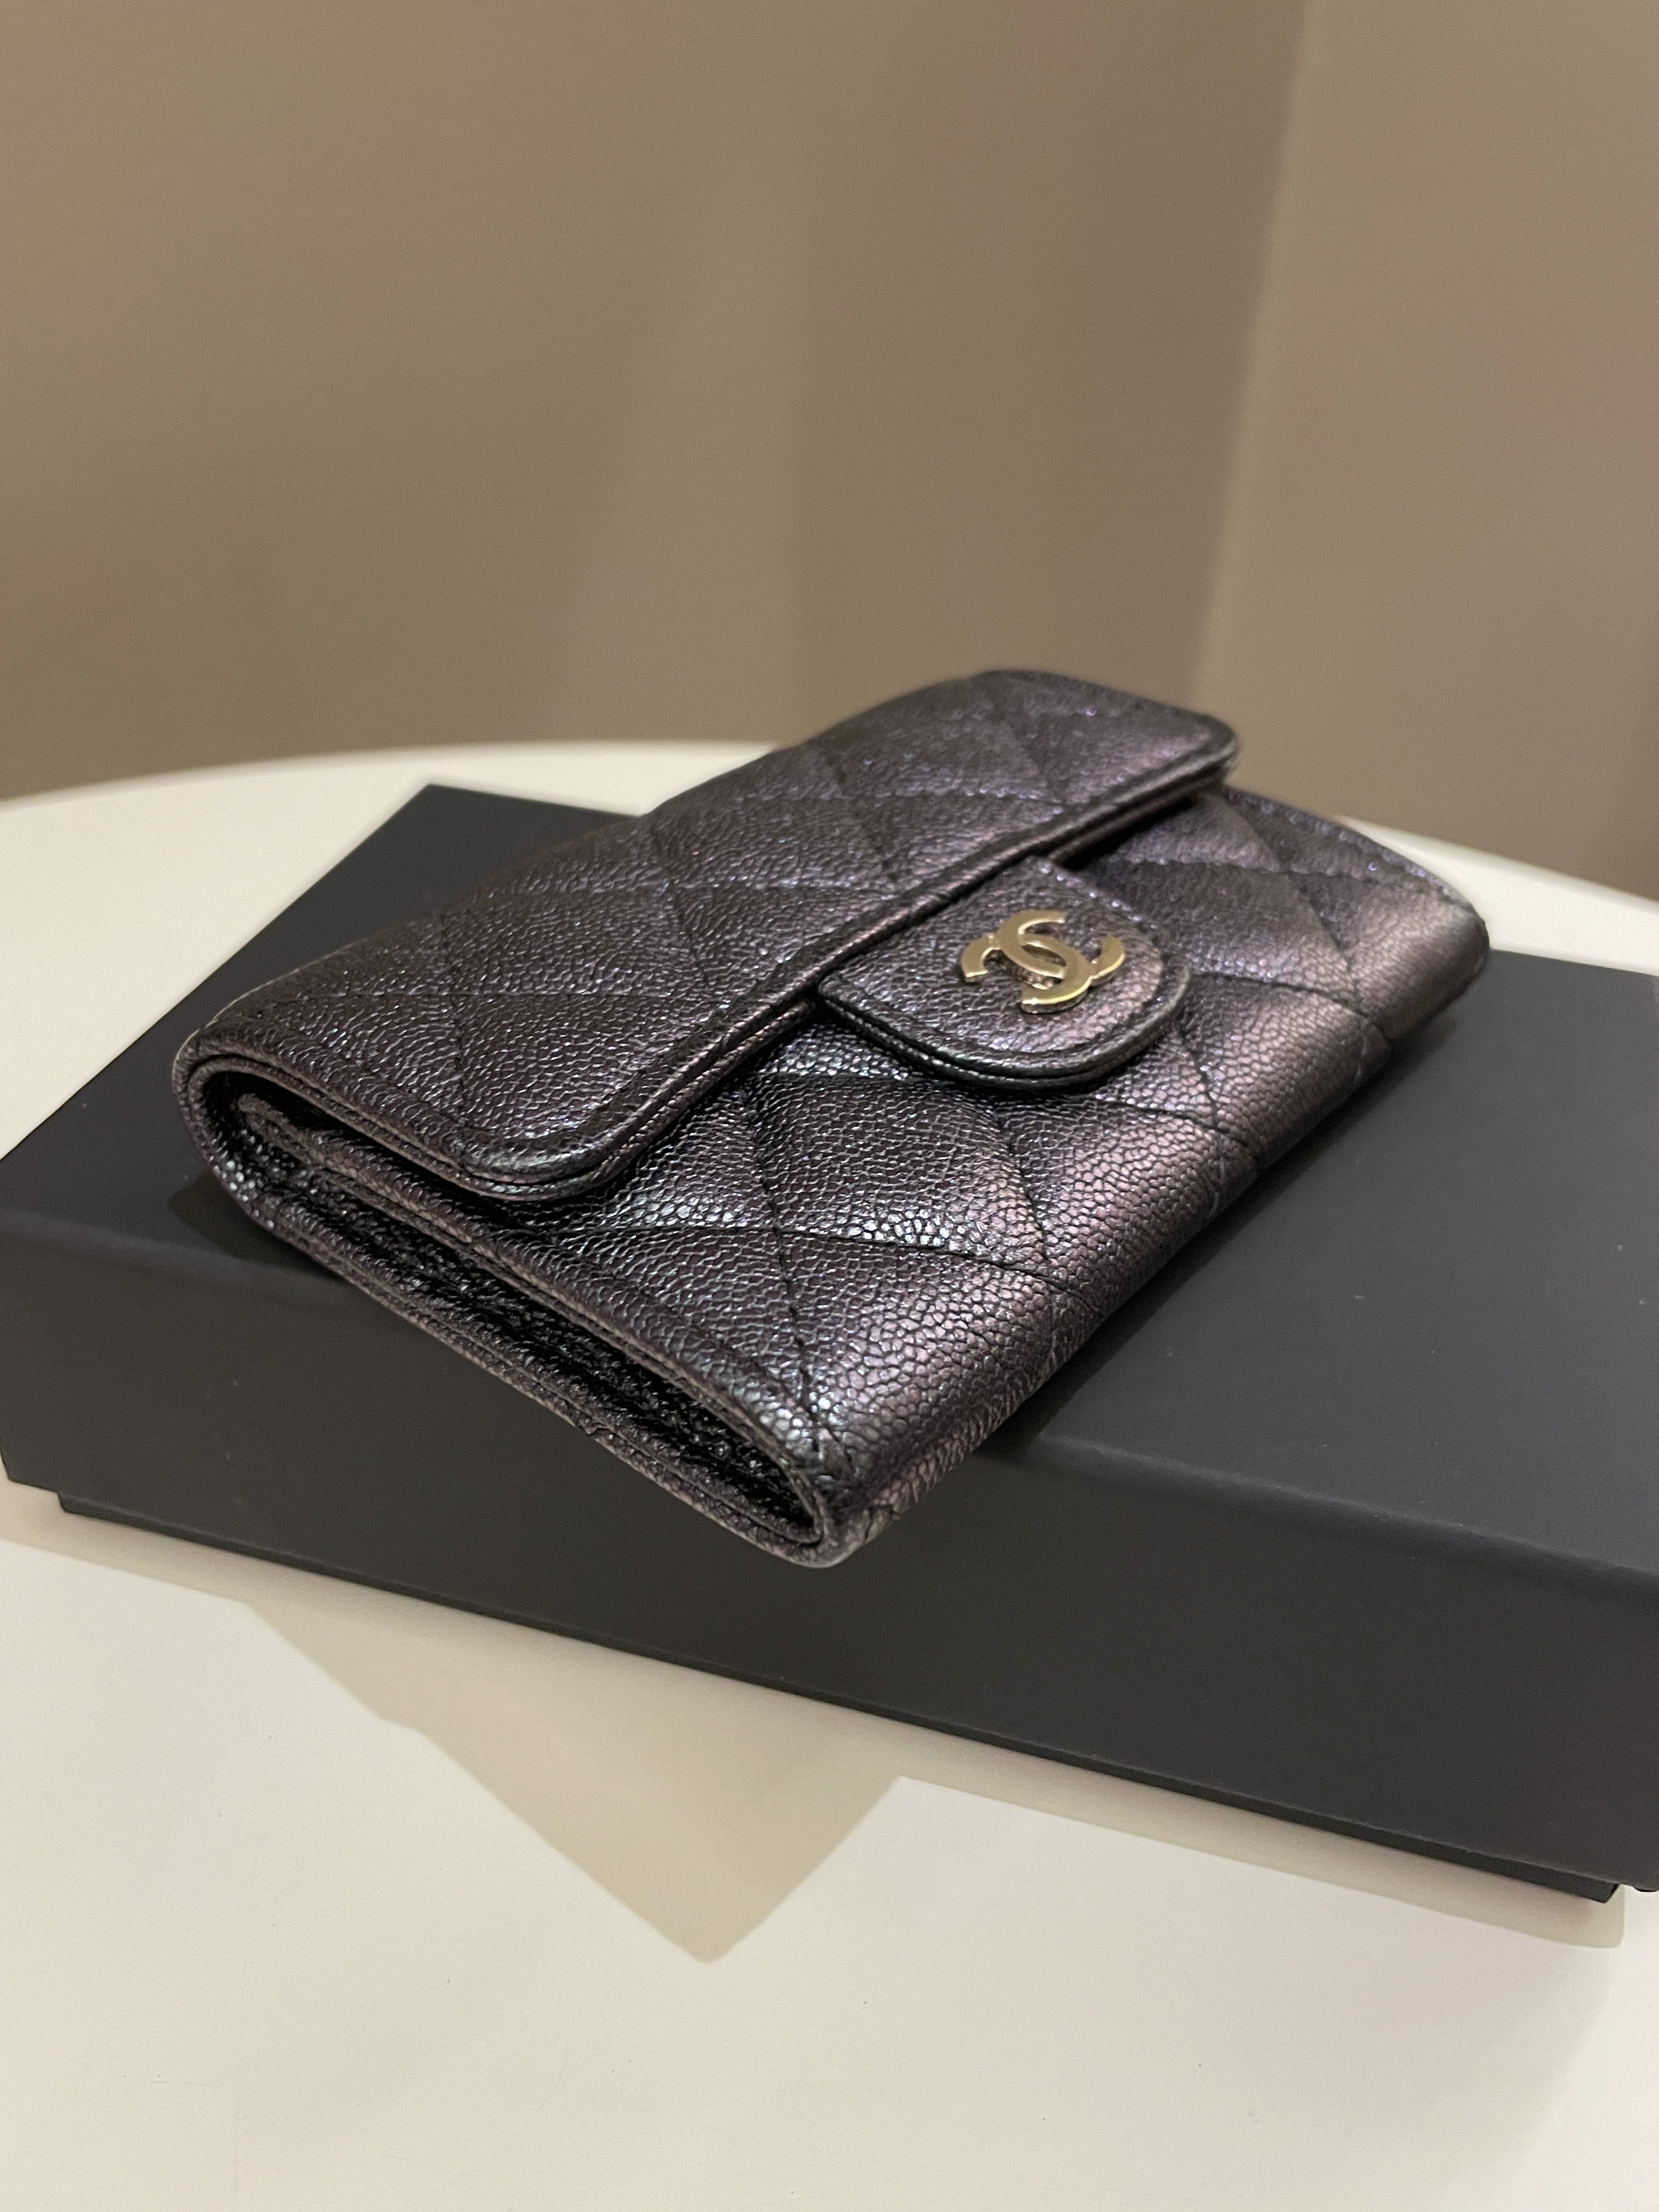 Chanel Classic Quilted Snap Card Holder Black Iridescent Caviar